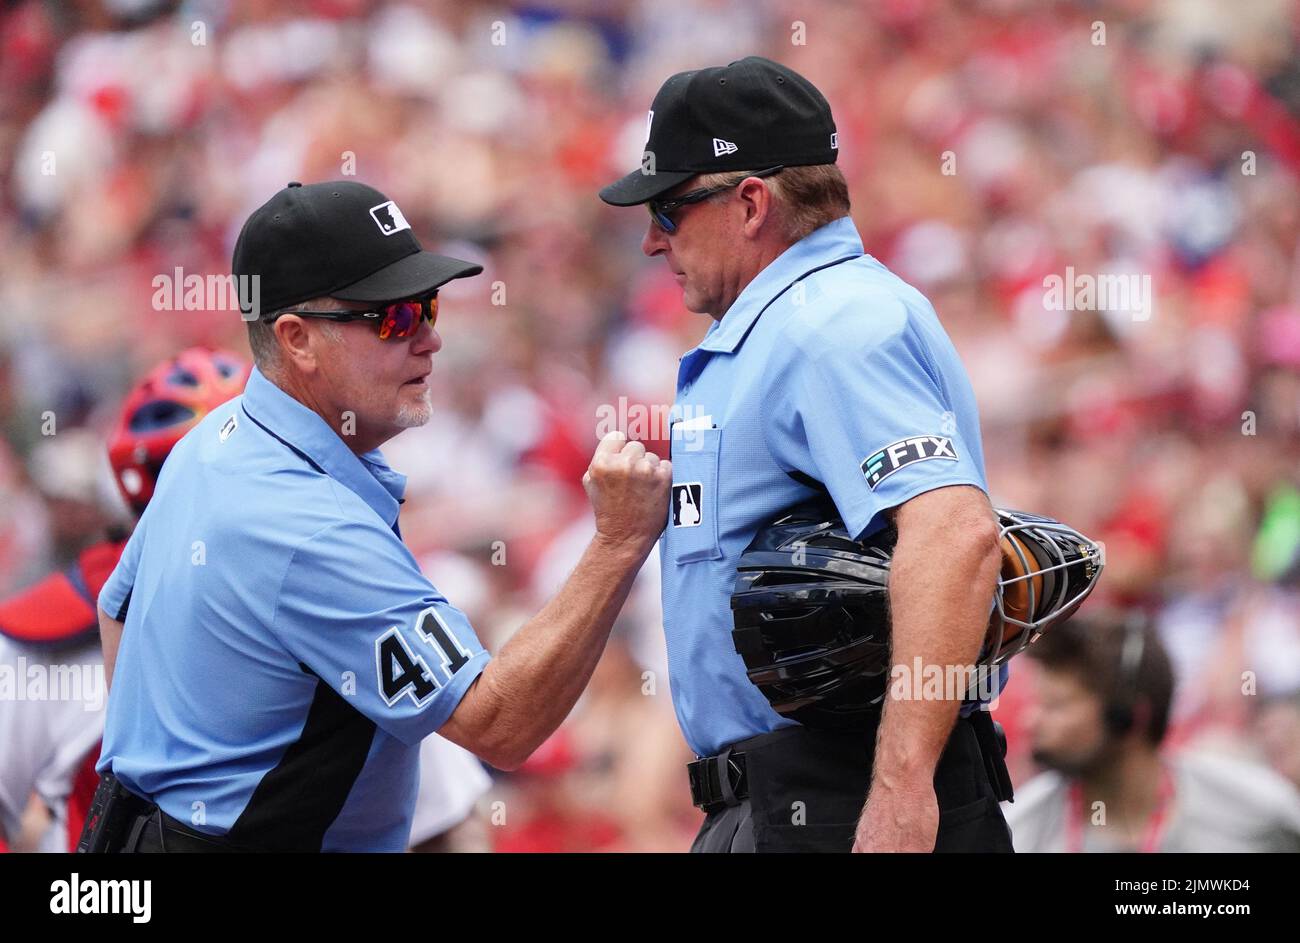 St. Louis, United States. 07th Aug, 2022. Umpire Jerry Meals (L) beats on the chest of home plate umpire Ed Hickox for good luck before the New York Yankees-St. Louis Cardinals baseball game at Busch Stadium in St. Louis on Sunday, August 7, 2022. Photo by Bill Greenblatt/UPI Credit: UPI/Alamy Live News Stock Photo